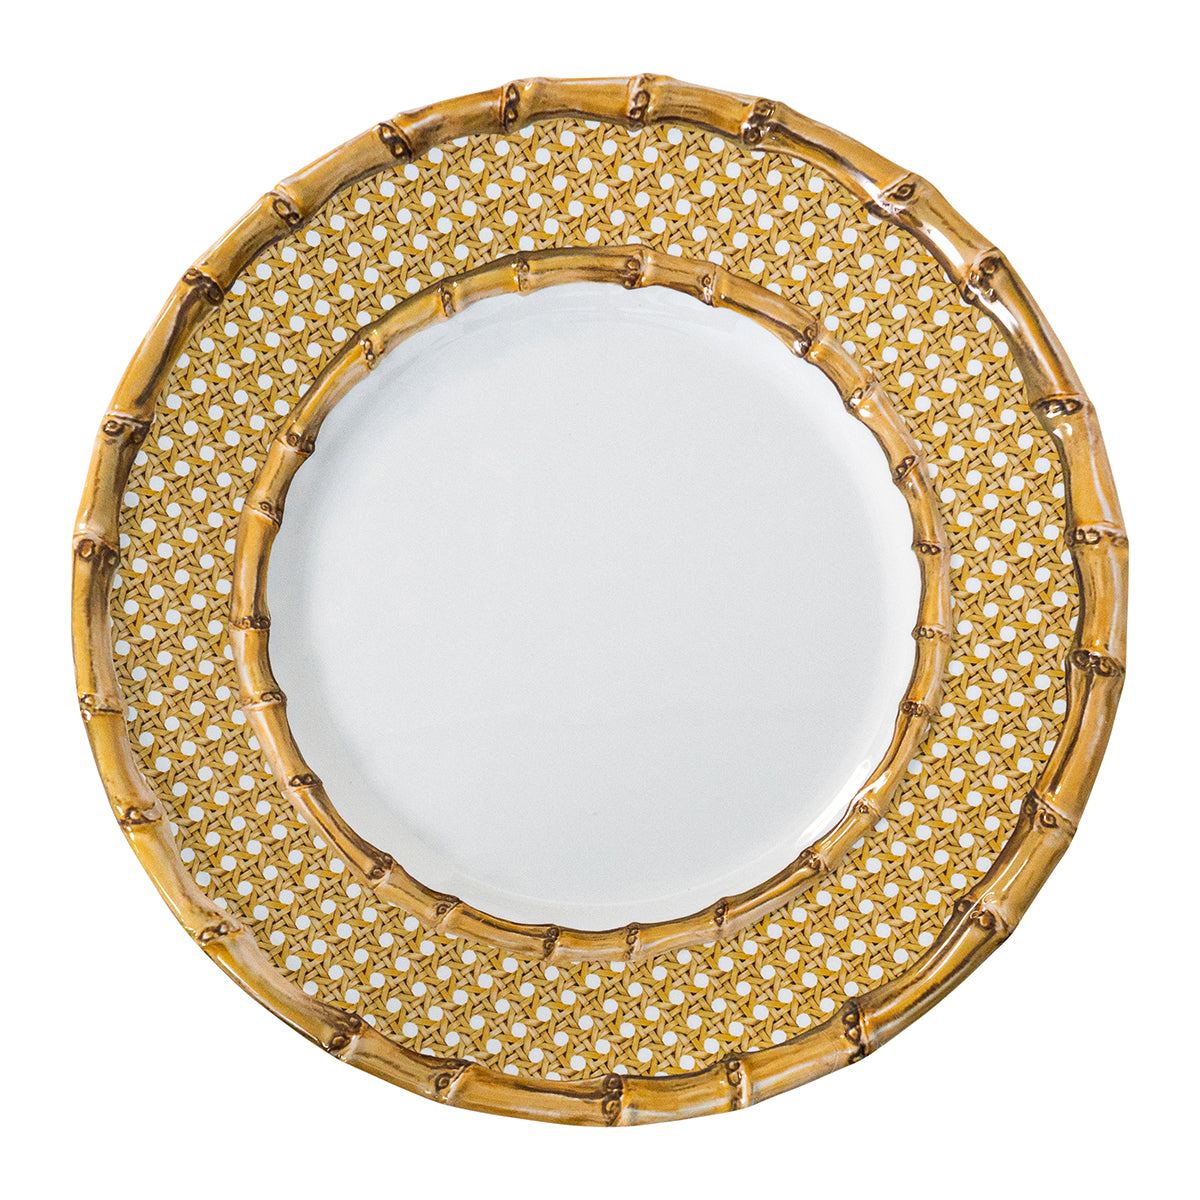 Bamboo Caning Melamine Dinner Plate - Natural